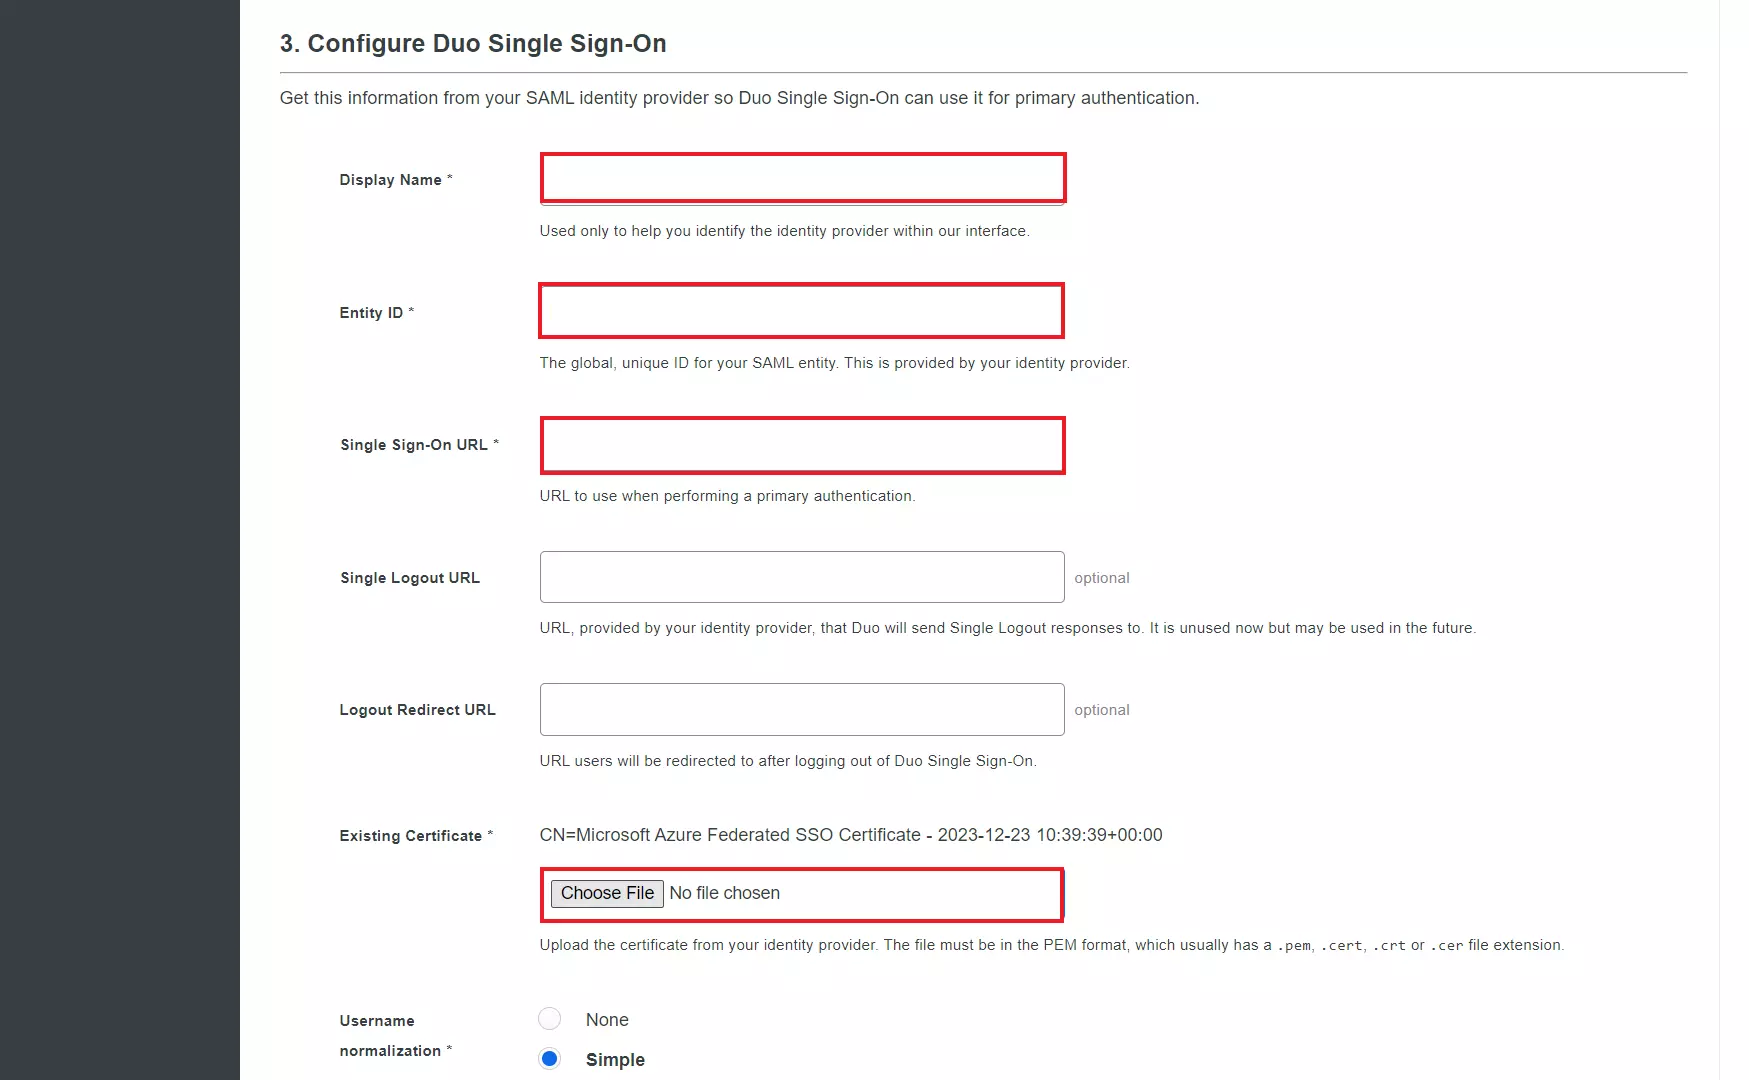 ASP.NET SAML Single Sign-On (SSO) using Duo as IDP - Configuration page